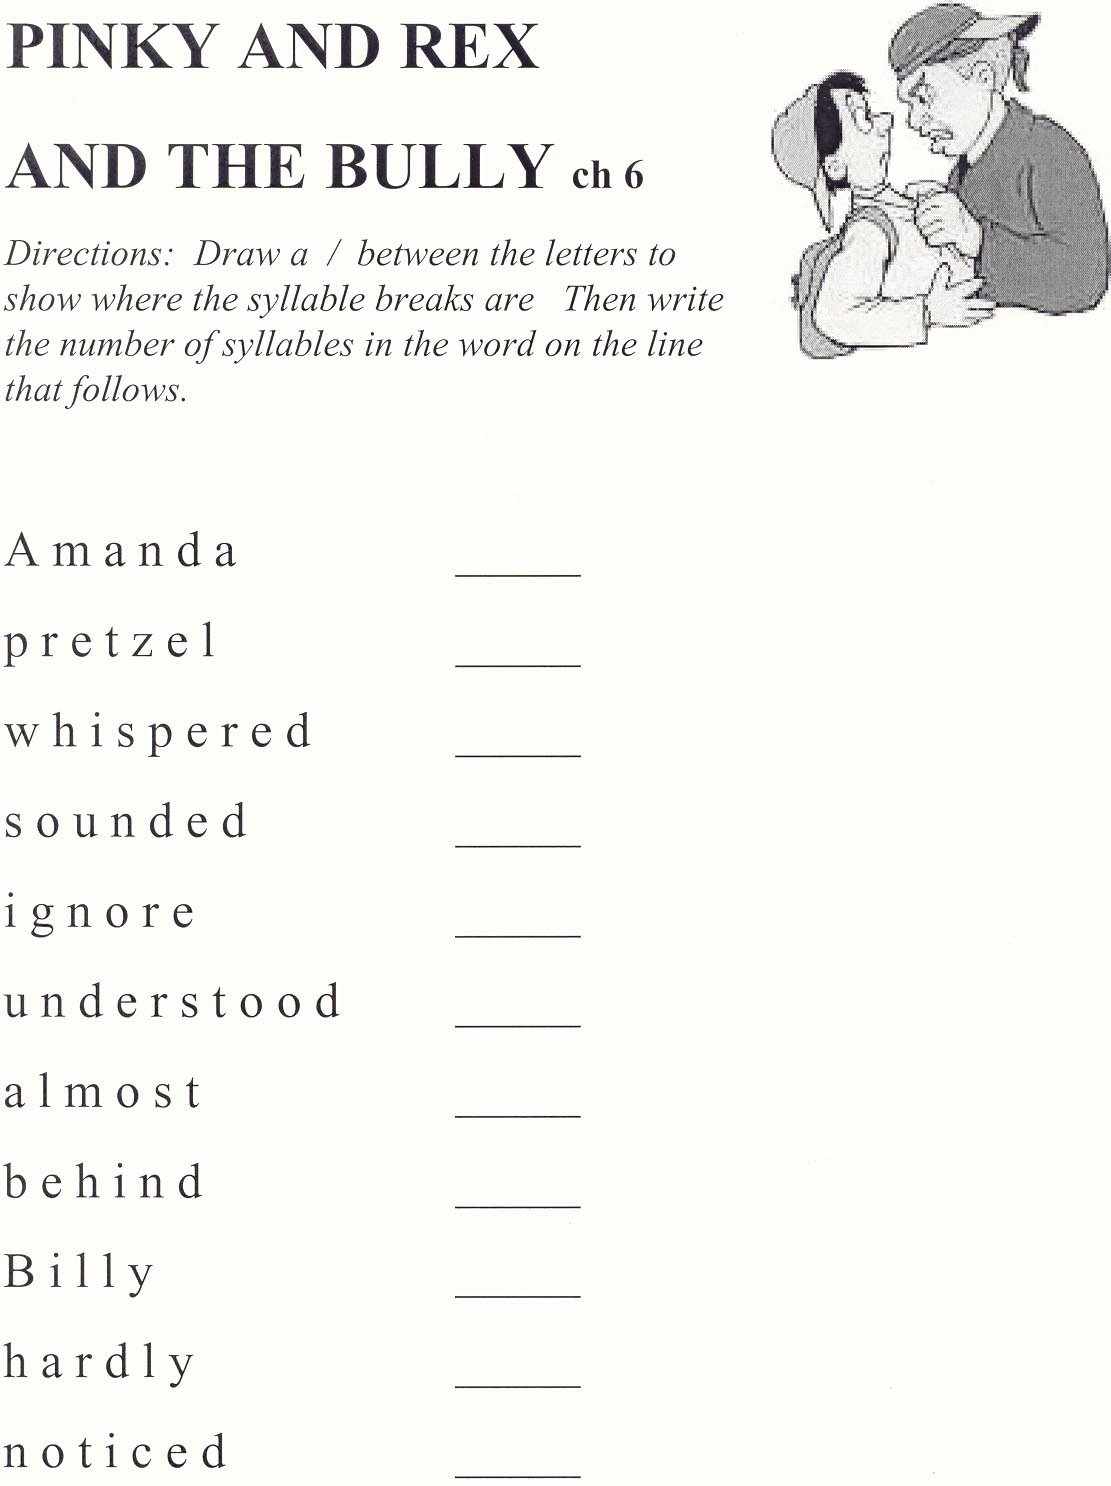 Seneca Ccsd 170  Pinky And Rex And The Bully Worksheets Intended For Bullying Worksheets For Kindergarten